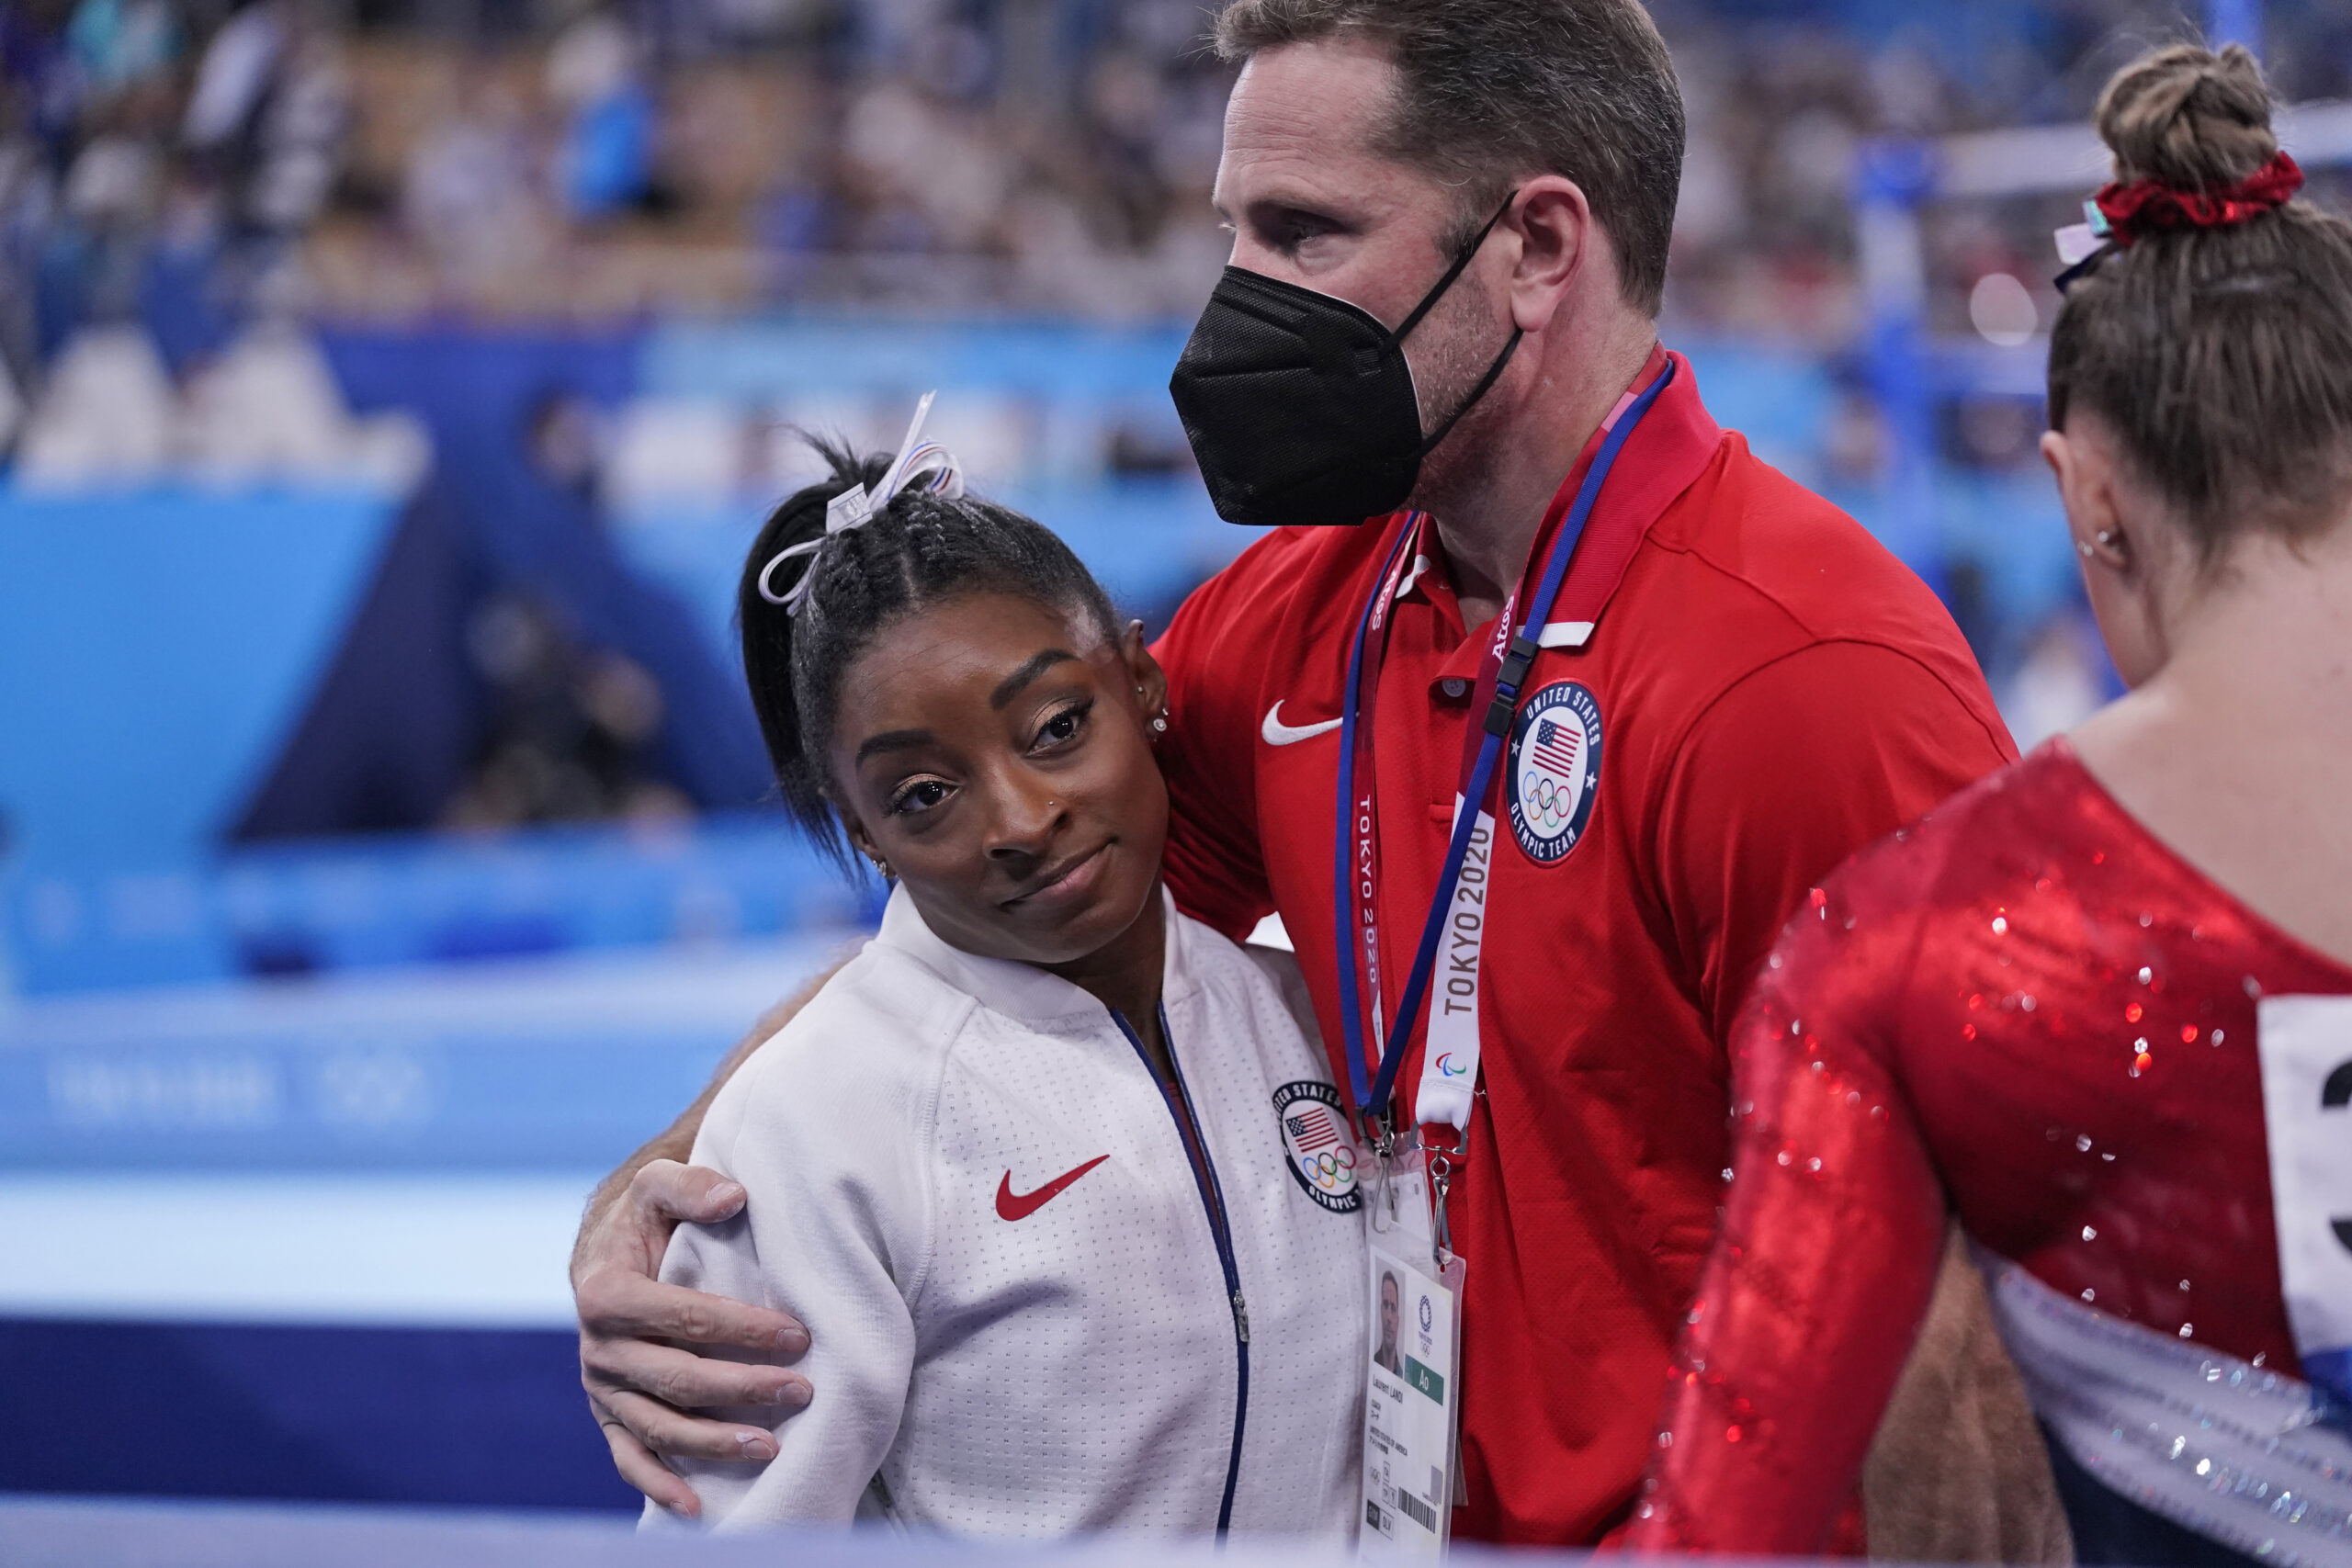 Coach Laurent Landi embraces Simone Biles, after she exited the team final with apparent injury, at the 2020 Summer Olympics, Tuesday, July 27, 2021, in Tokyo. The 24-year-old reigning Olympic gymnastics champion Biles huddled with a trainer after landing her vault. She then exited the competition floor with the team doctor. (AP Photo/Gregory Bull)